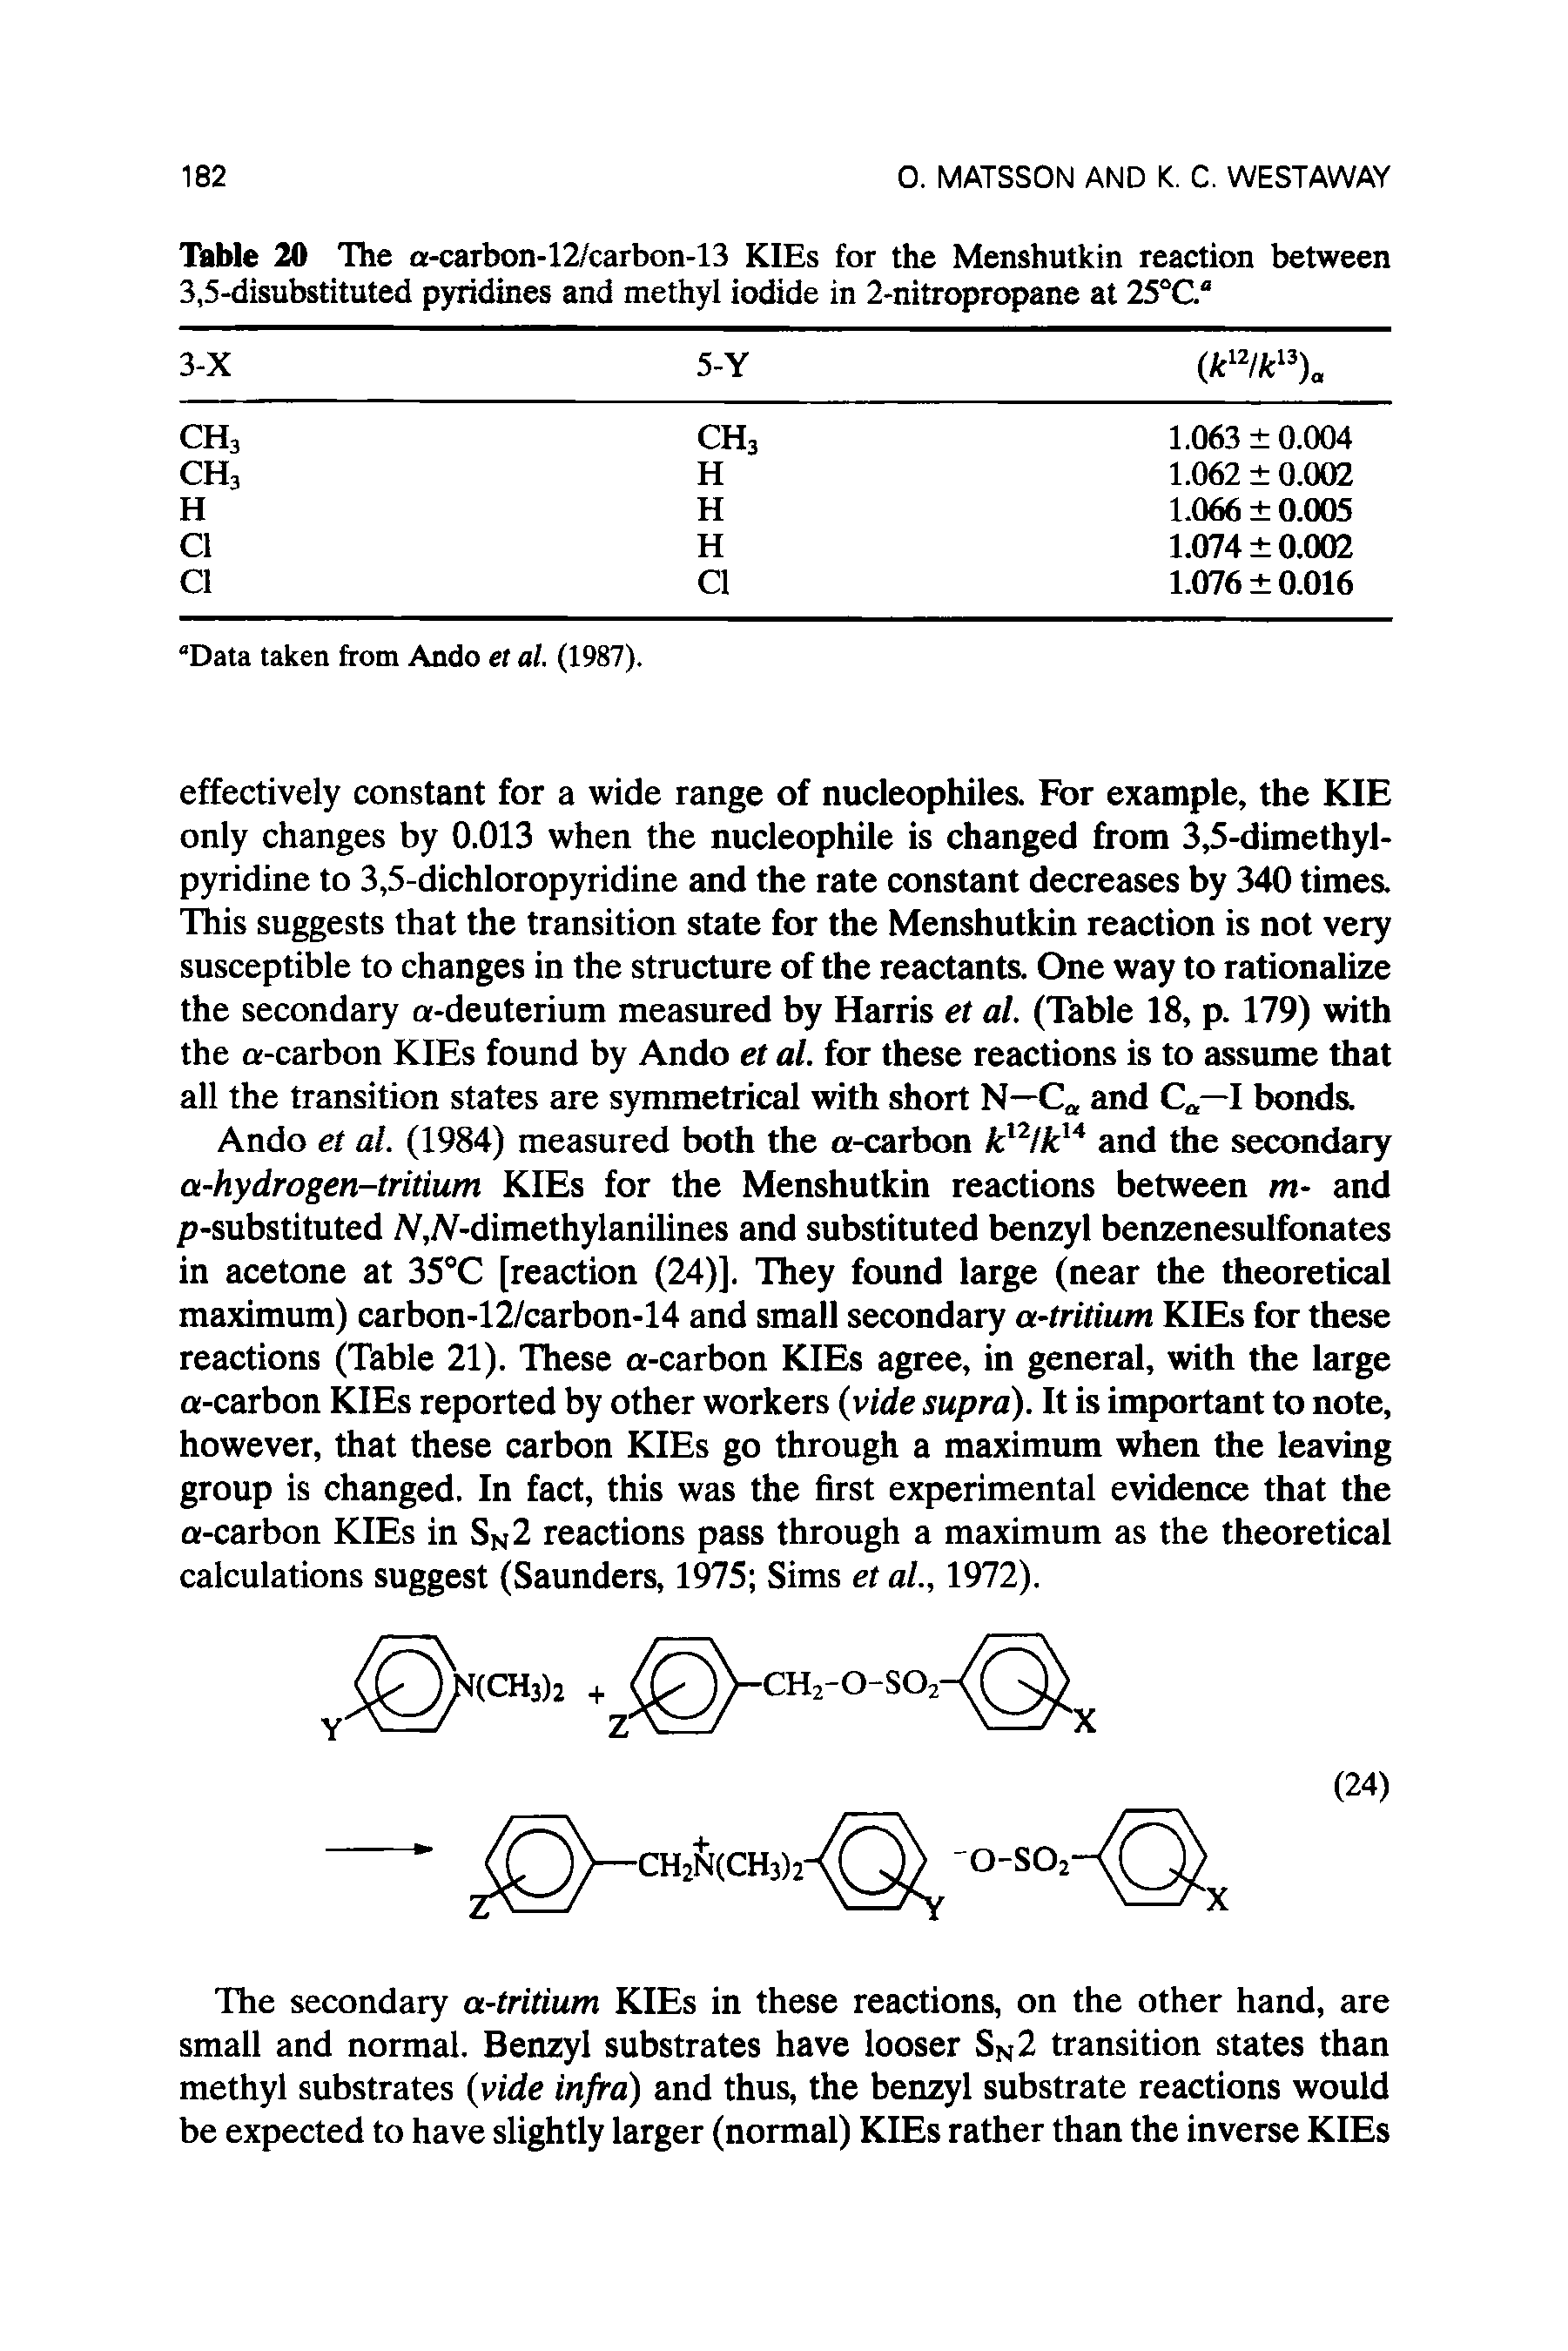 Table 20 The a-carbon-12/carbon-13 KIEs for the Menshutkin reaction between 3,5-disubstituted pyridines and methyl iodide in 2-nitropropane at 25°C. ...